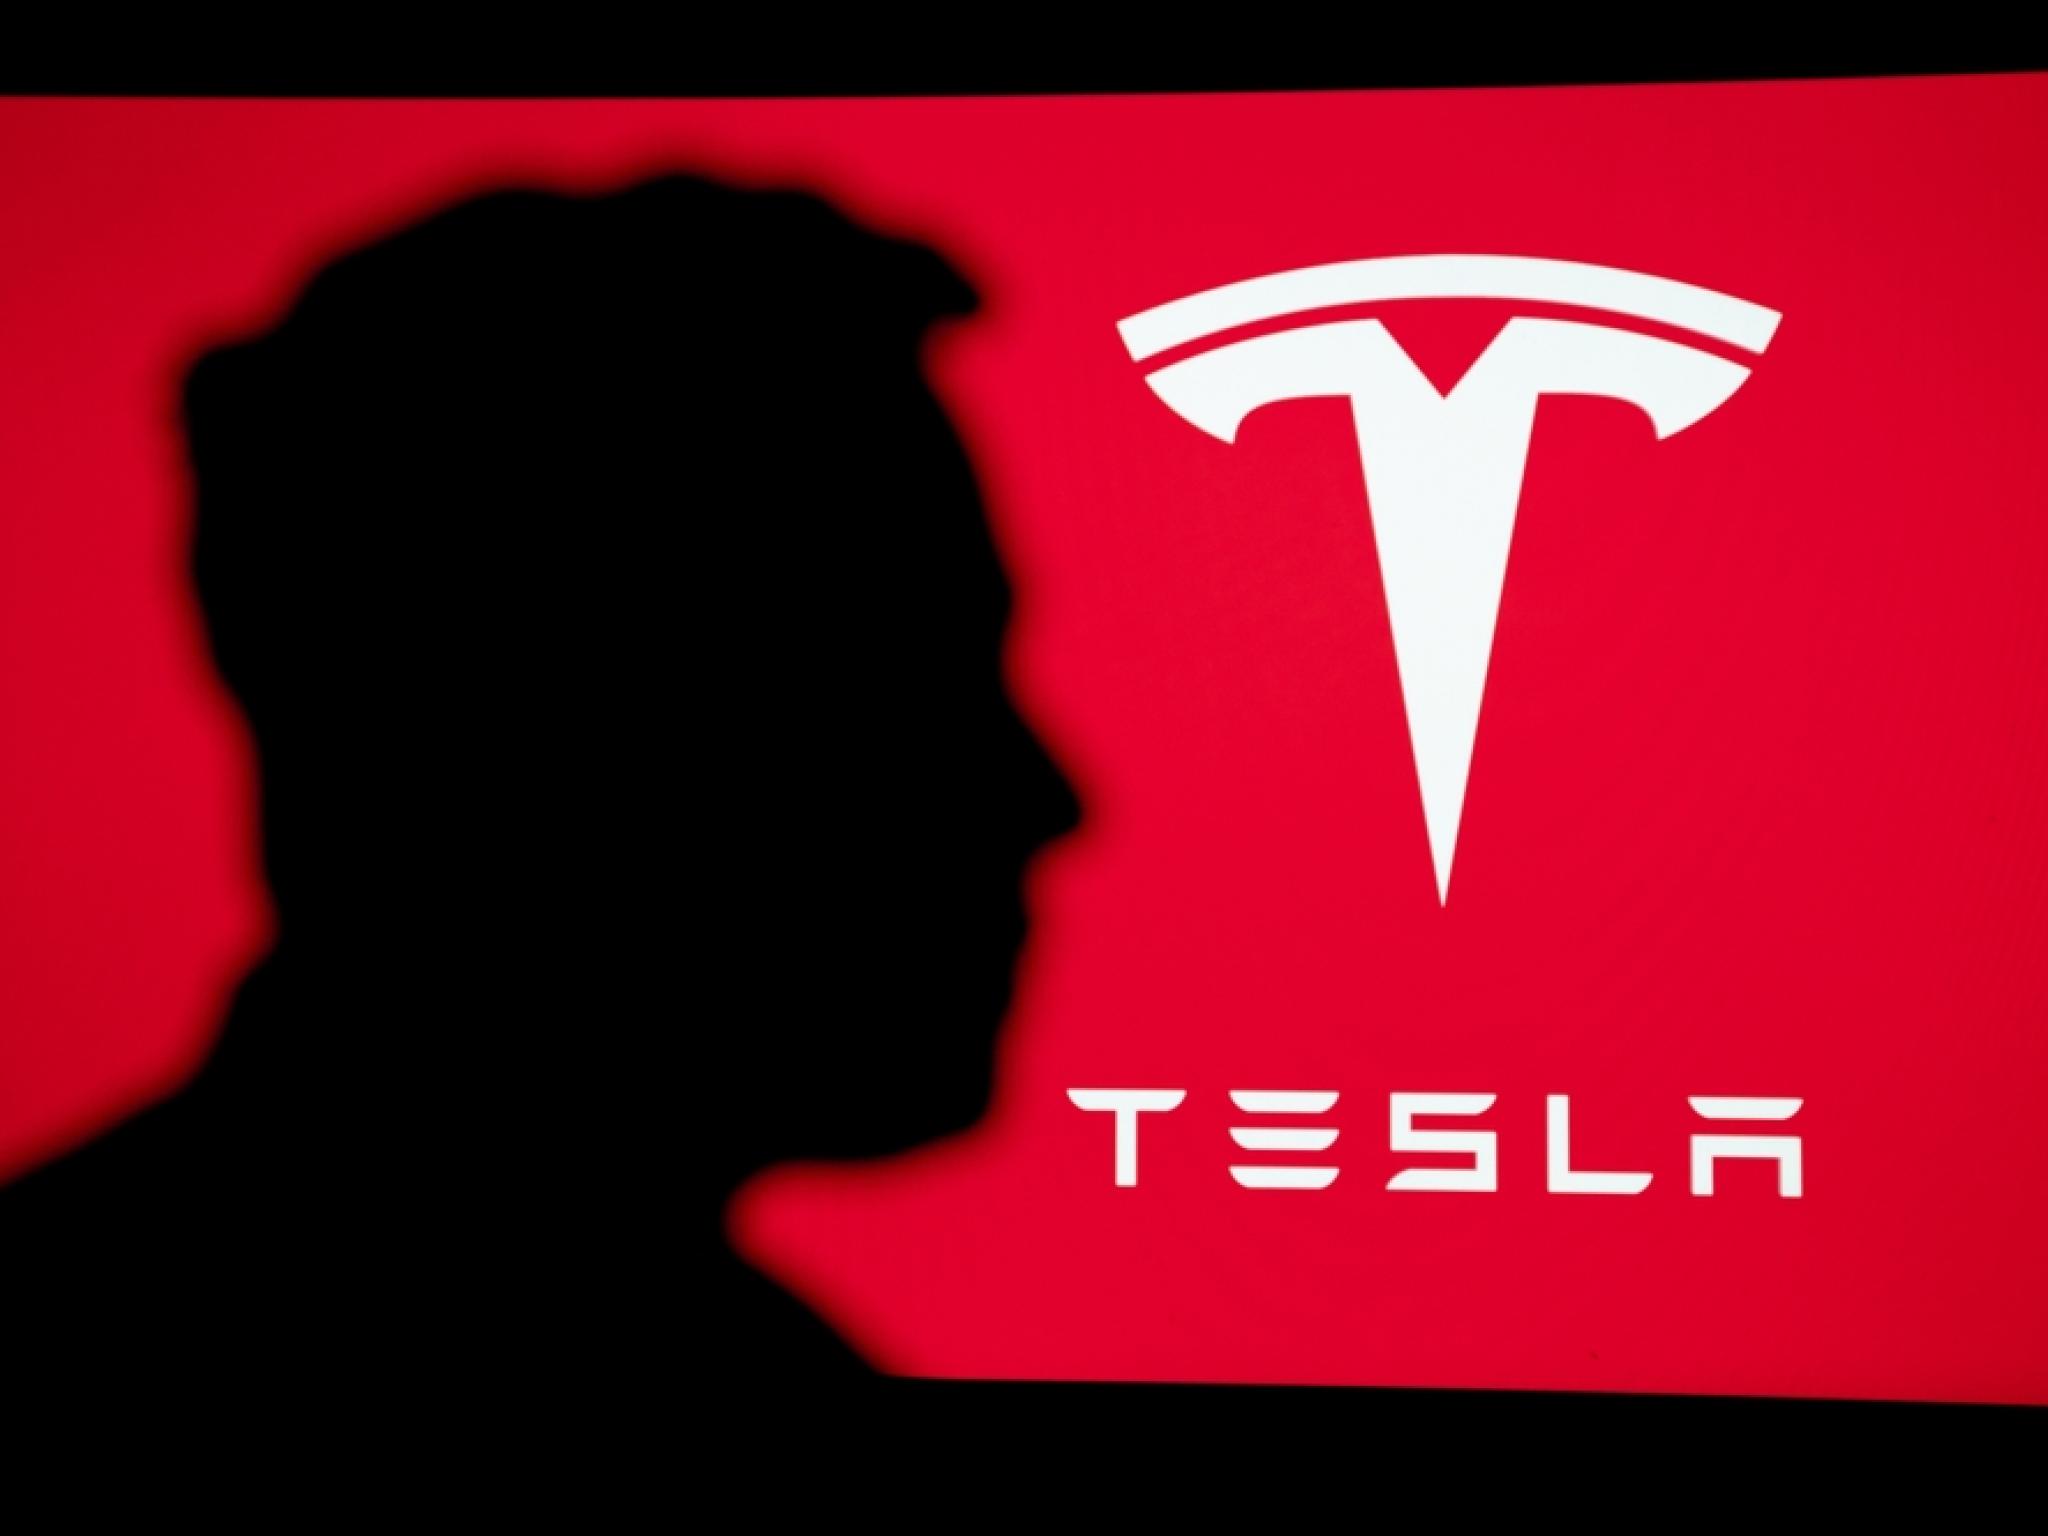  tesla-analyst-warns-shareholders-ai-investments-could-slow-if-elon-musk-doesnt-get-25-voting-stake 